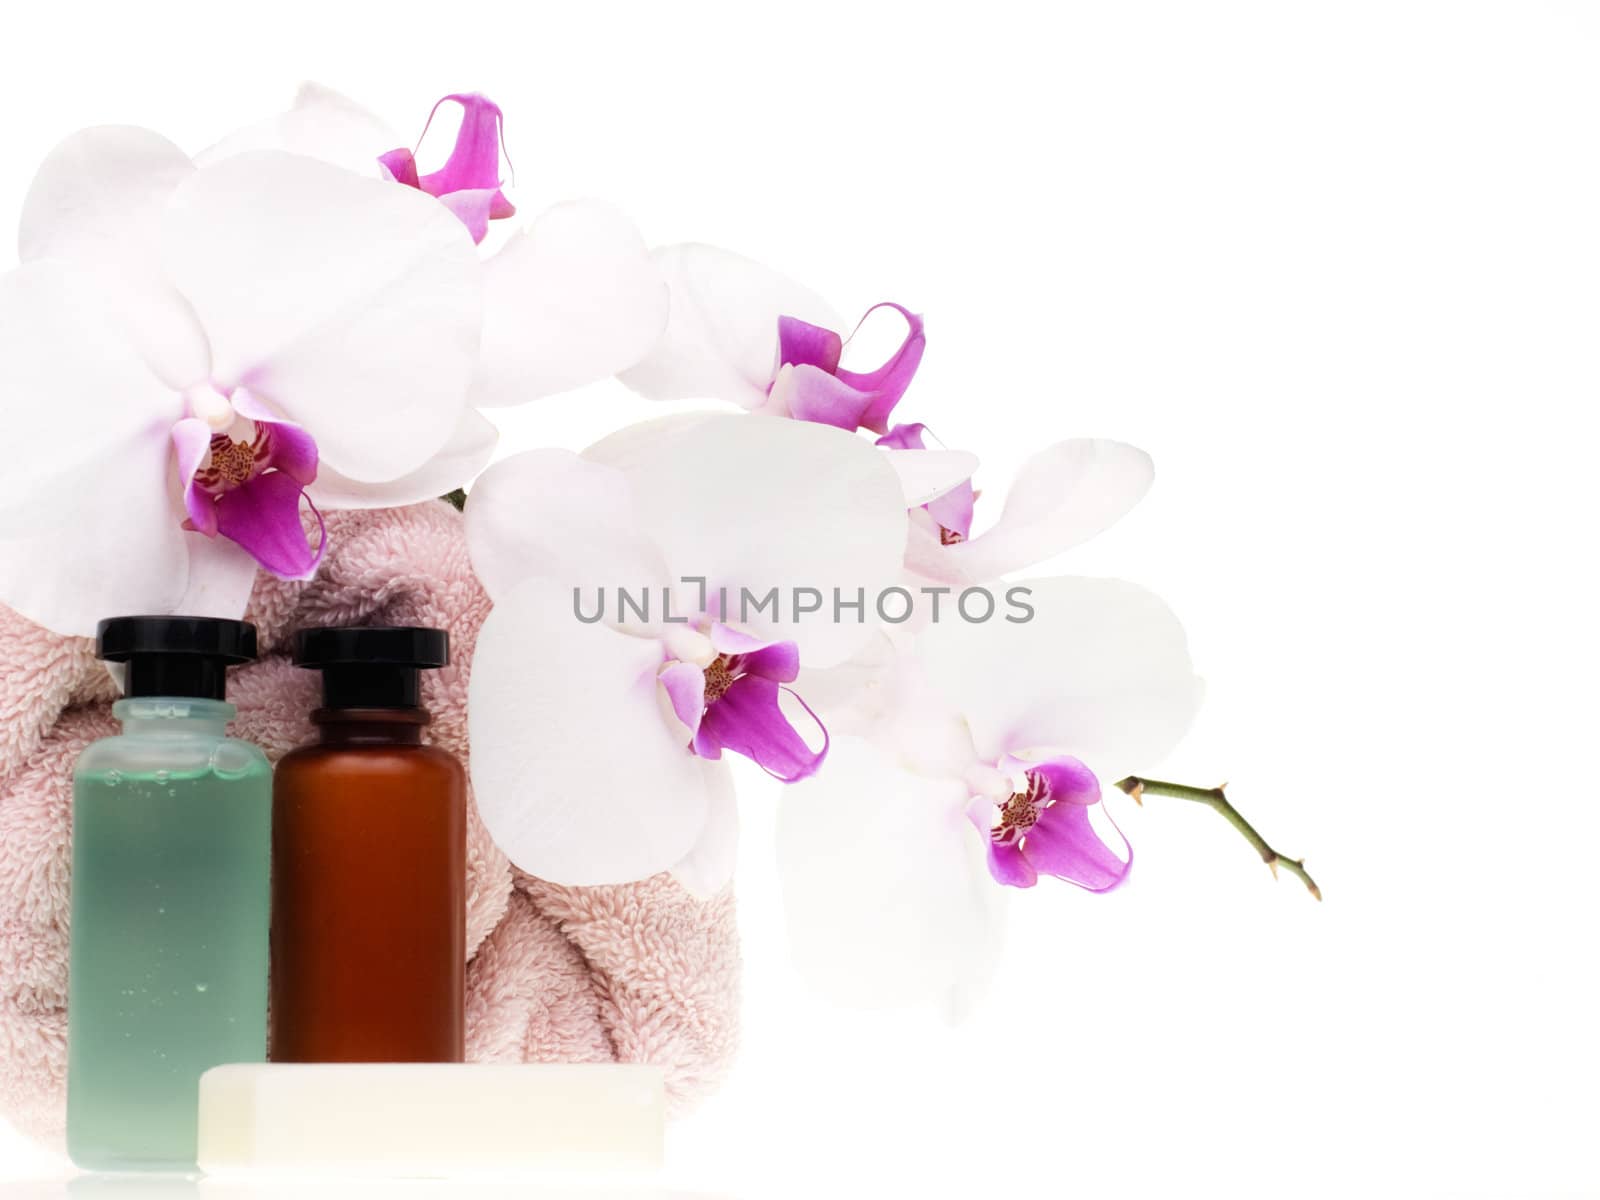 Spa set with white orchid, pink towel, bottles and soap on white background